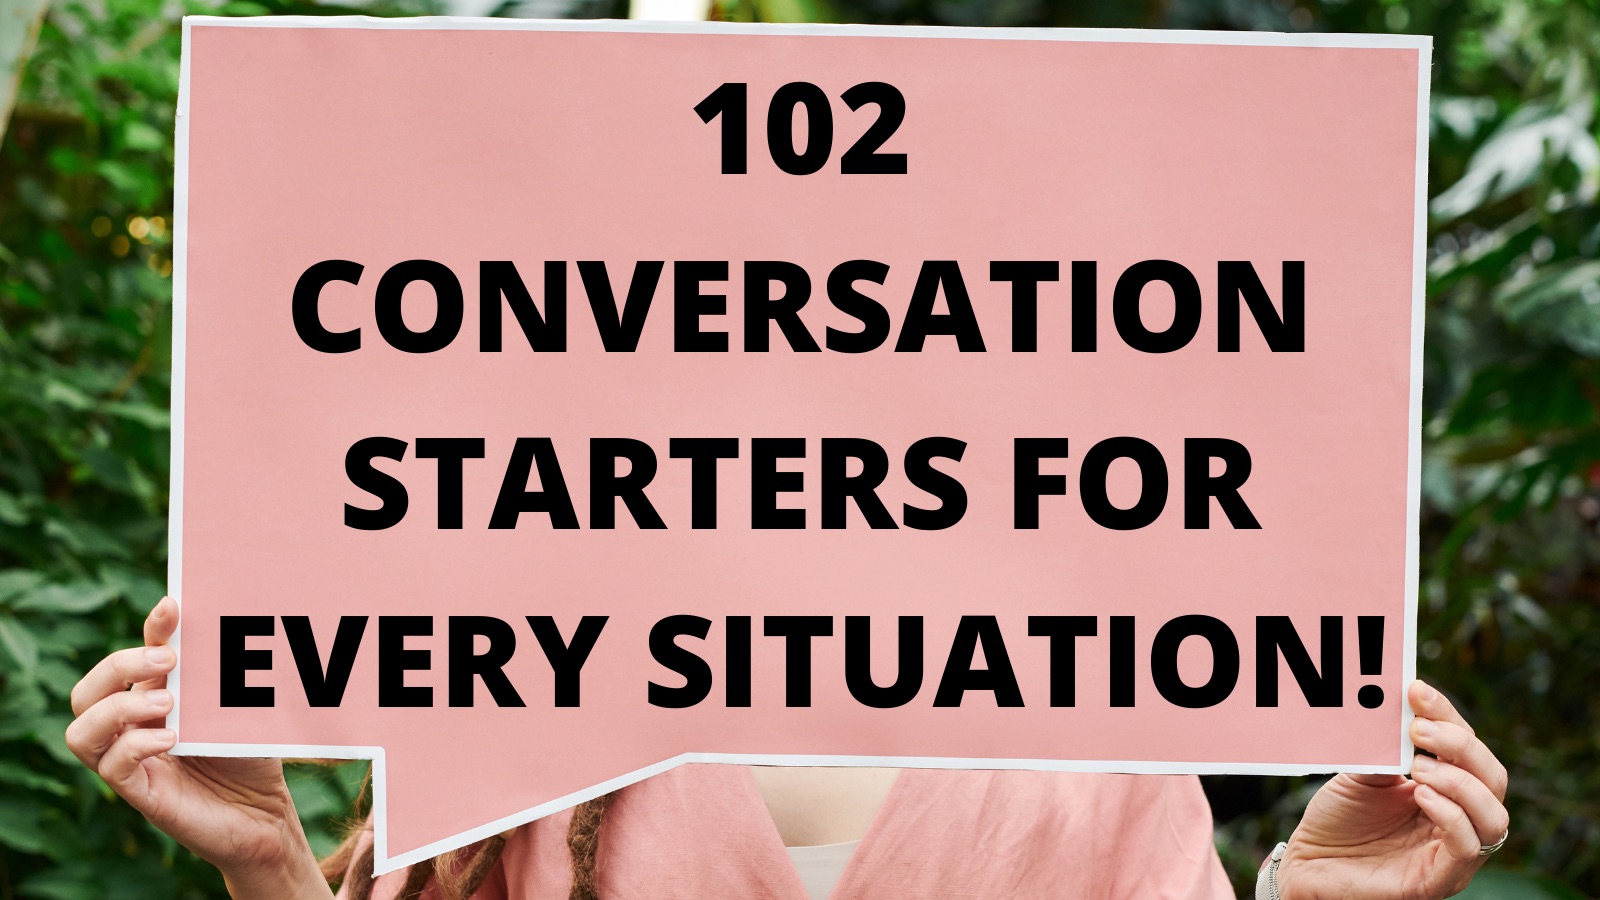 102 conversation starters for every situation!